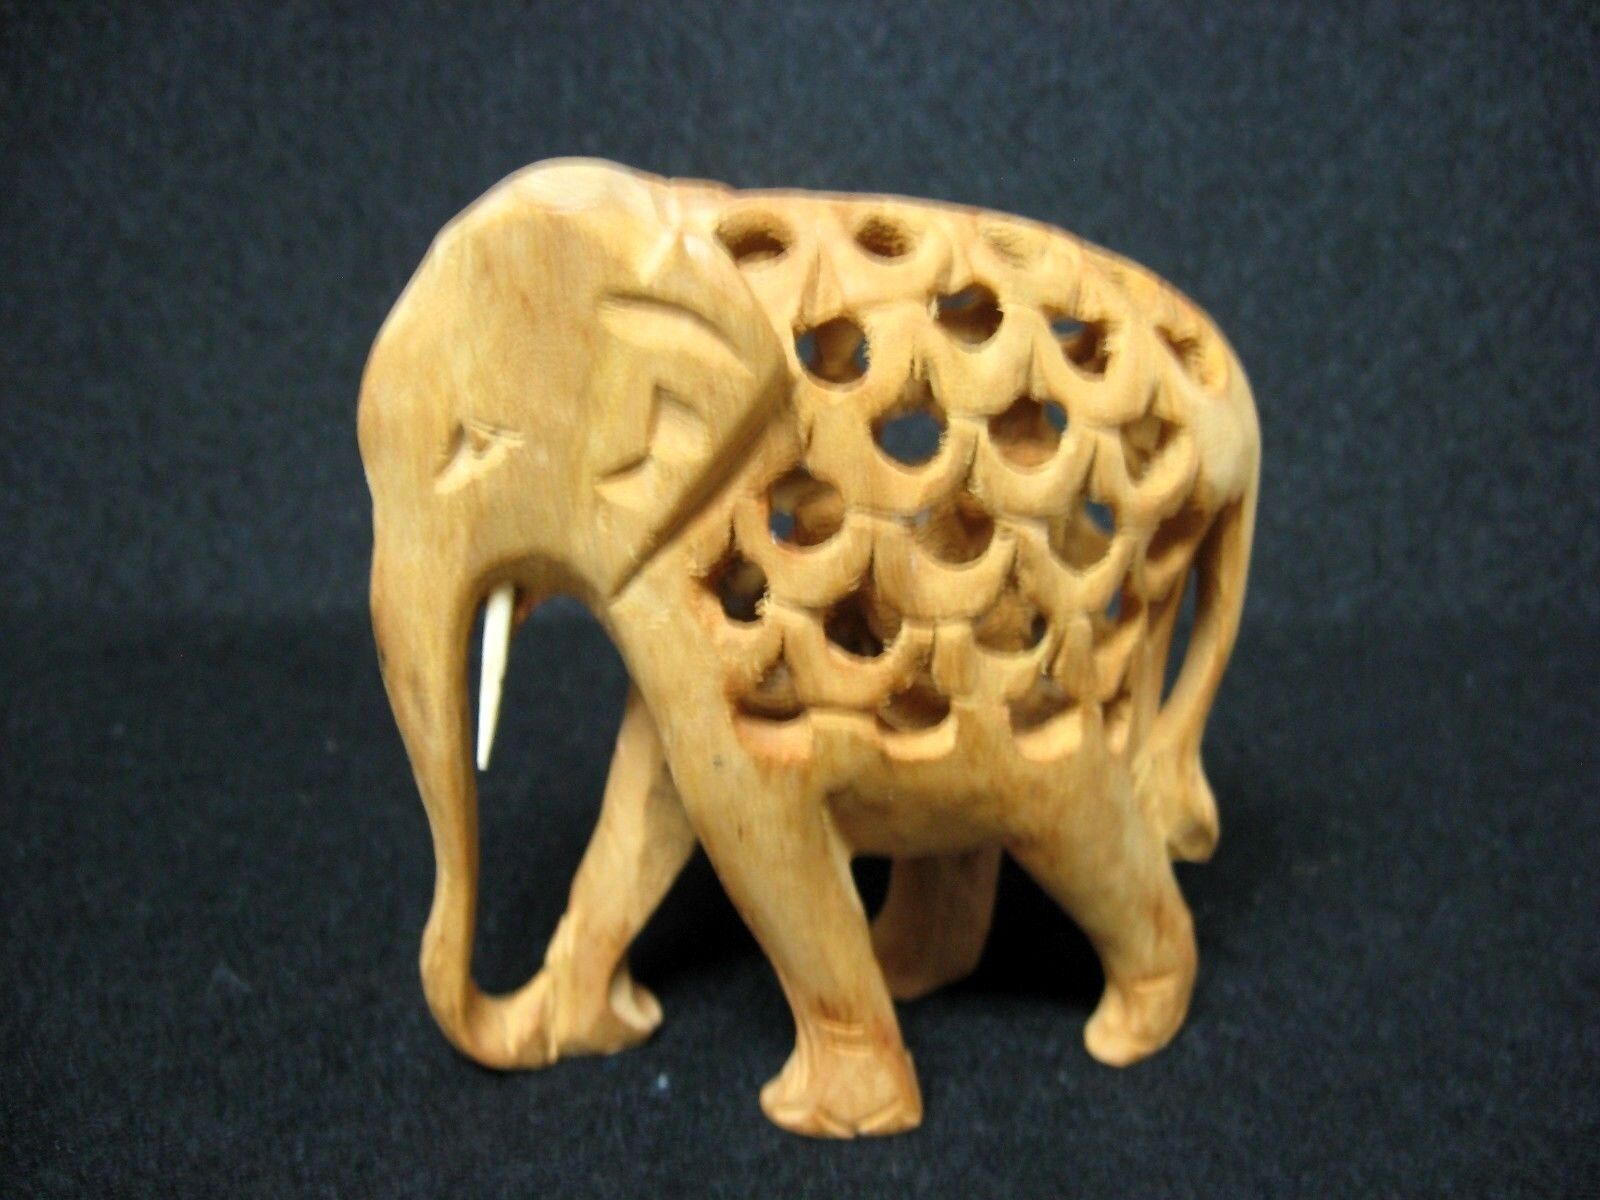 Hand carved wooden ELEPHANT figures 2 in 1 * ONE WHOLE PIECE